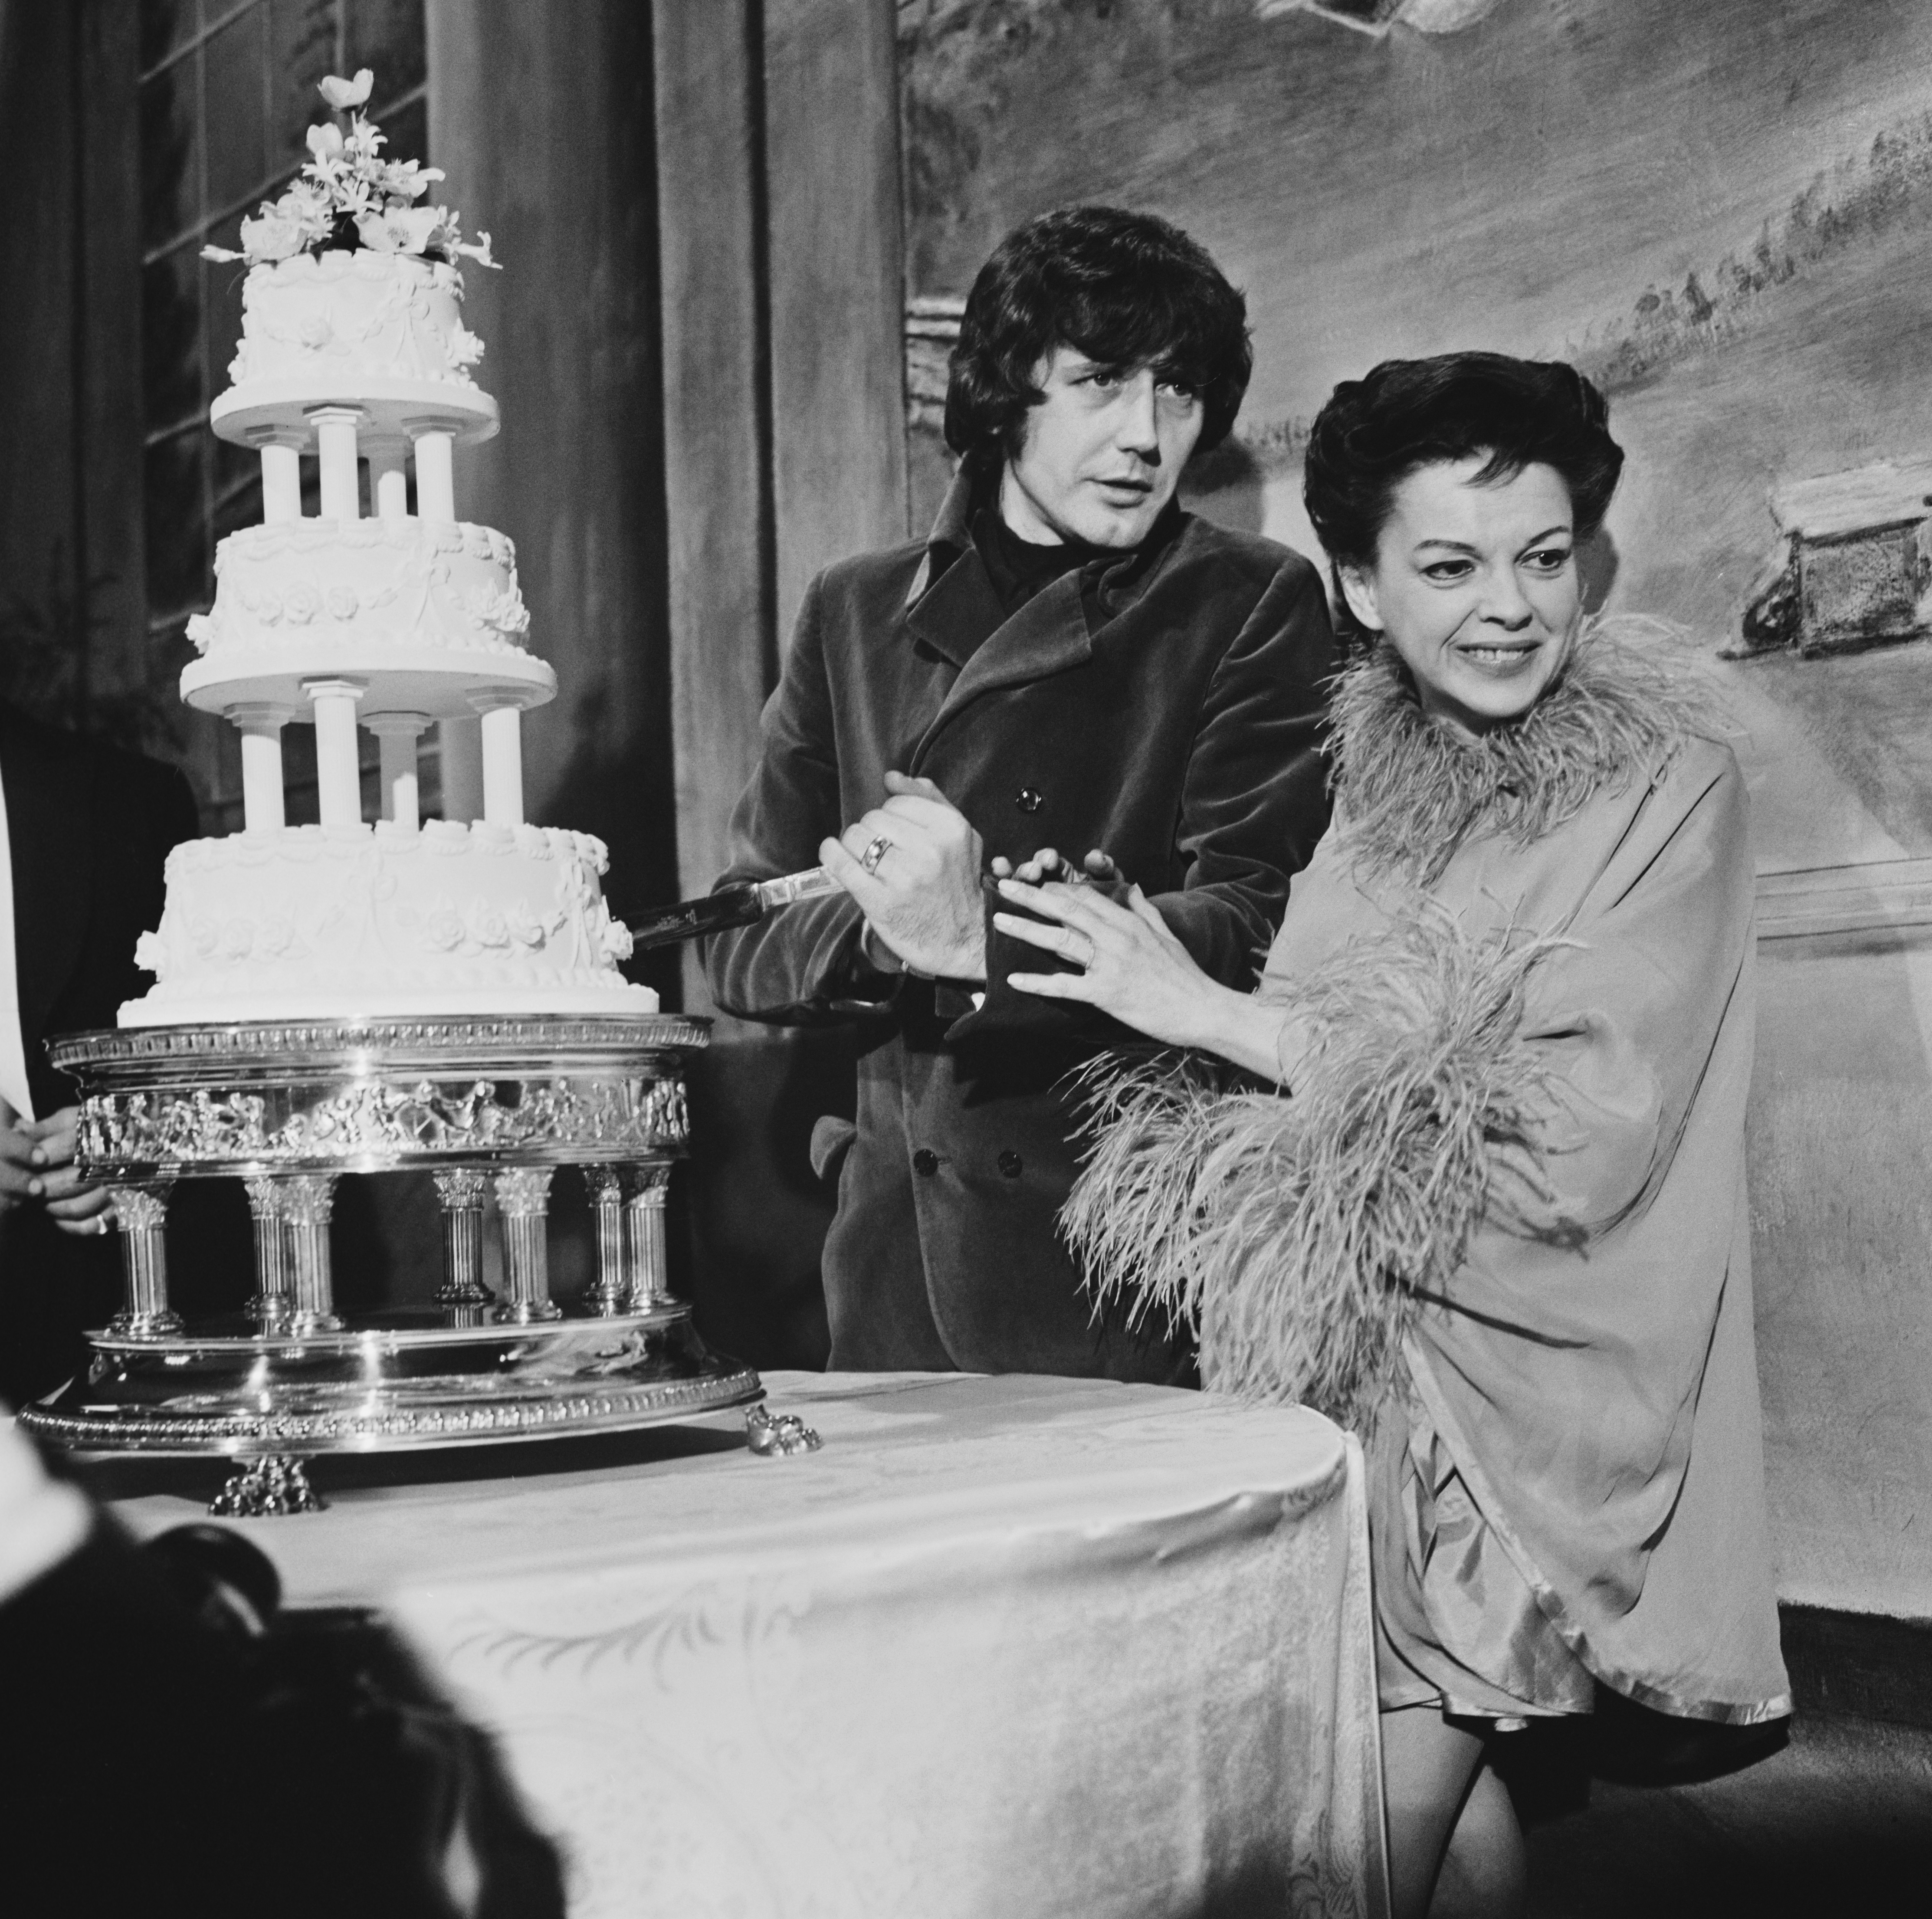 Judy Garland and Mickey Deans cutting their wedding cake, London, UK, March 15, 1969. (Evening Standard—Getty Images)